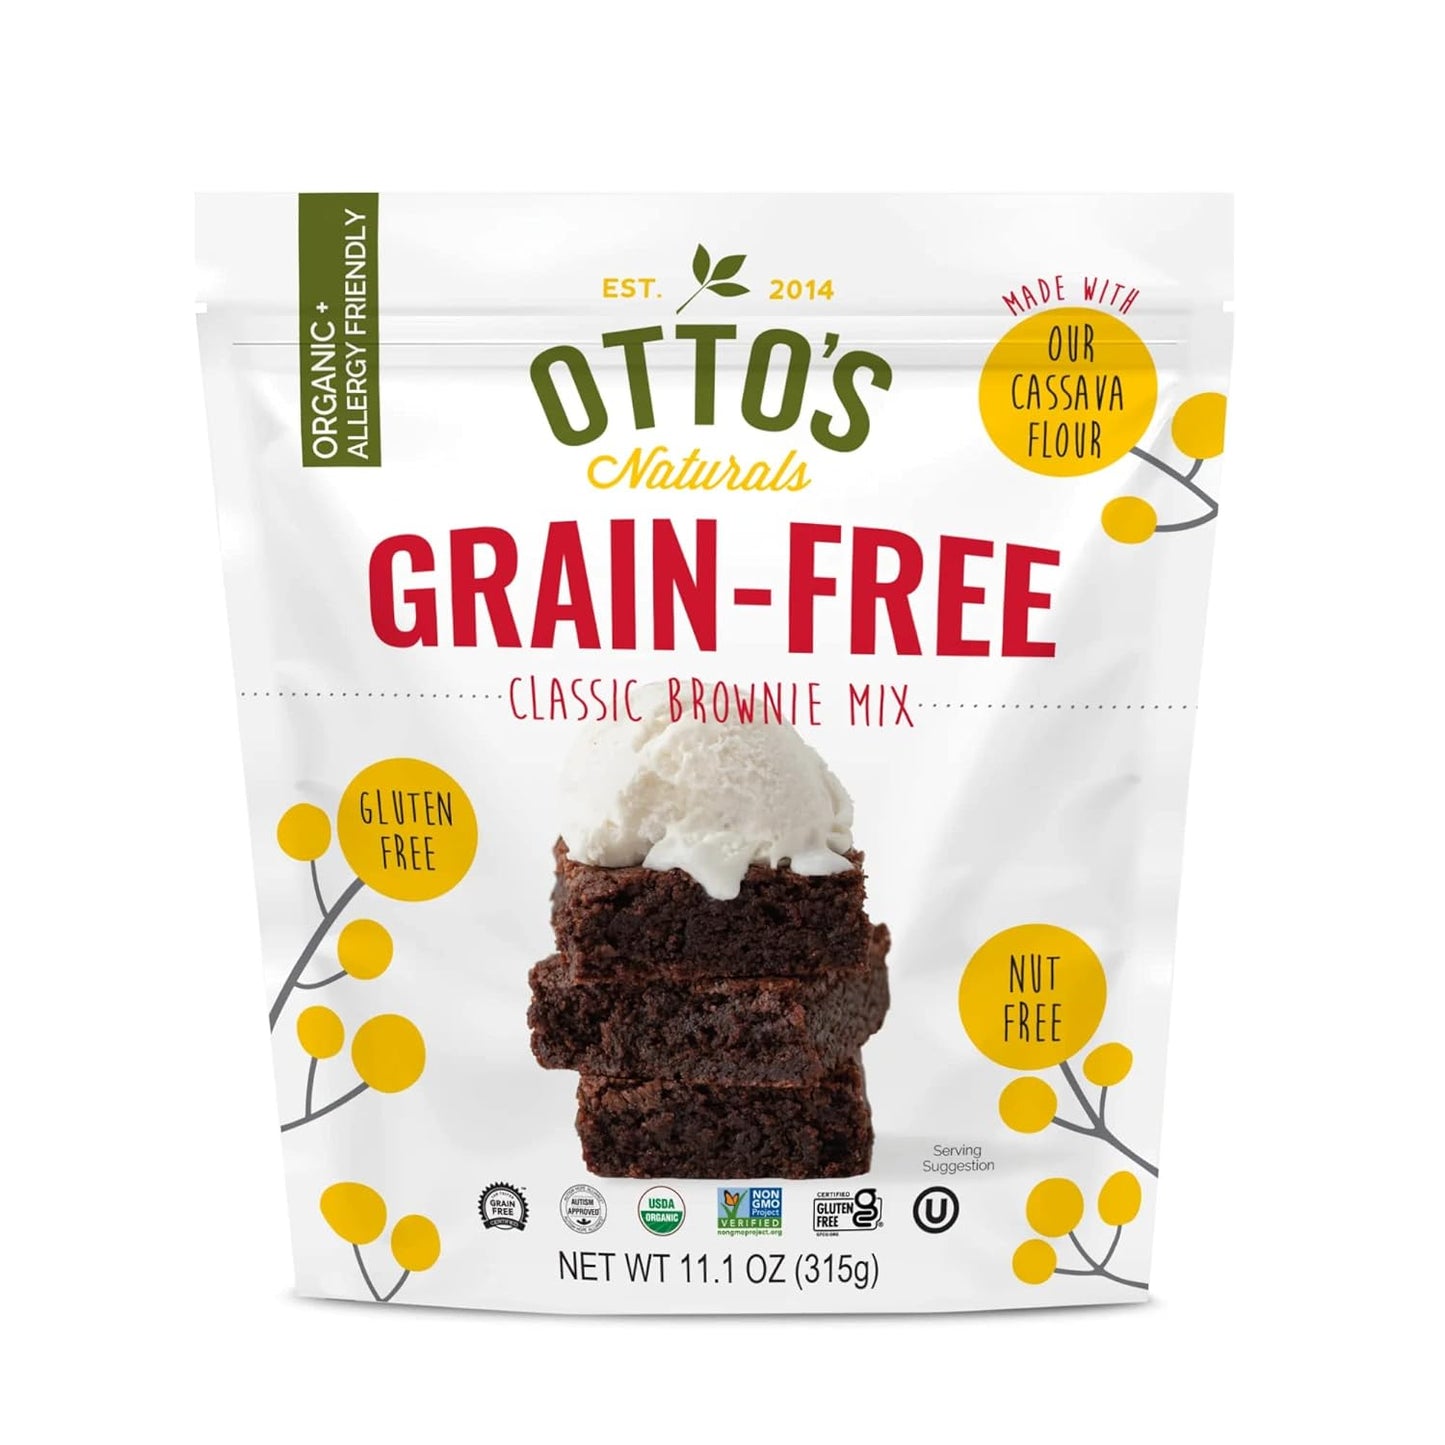 Otto's Naturals, Classic Brownie Mix - Organic, Gluten-Free, Nut Free, Non-GMO Verified, Made with Organic Cassava Flour - 11.1 Ounce Bag (Grain Free Classic Brownie Single)